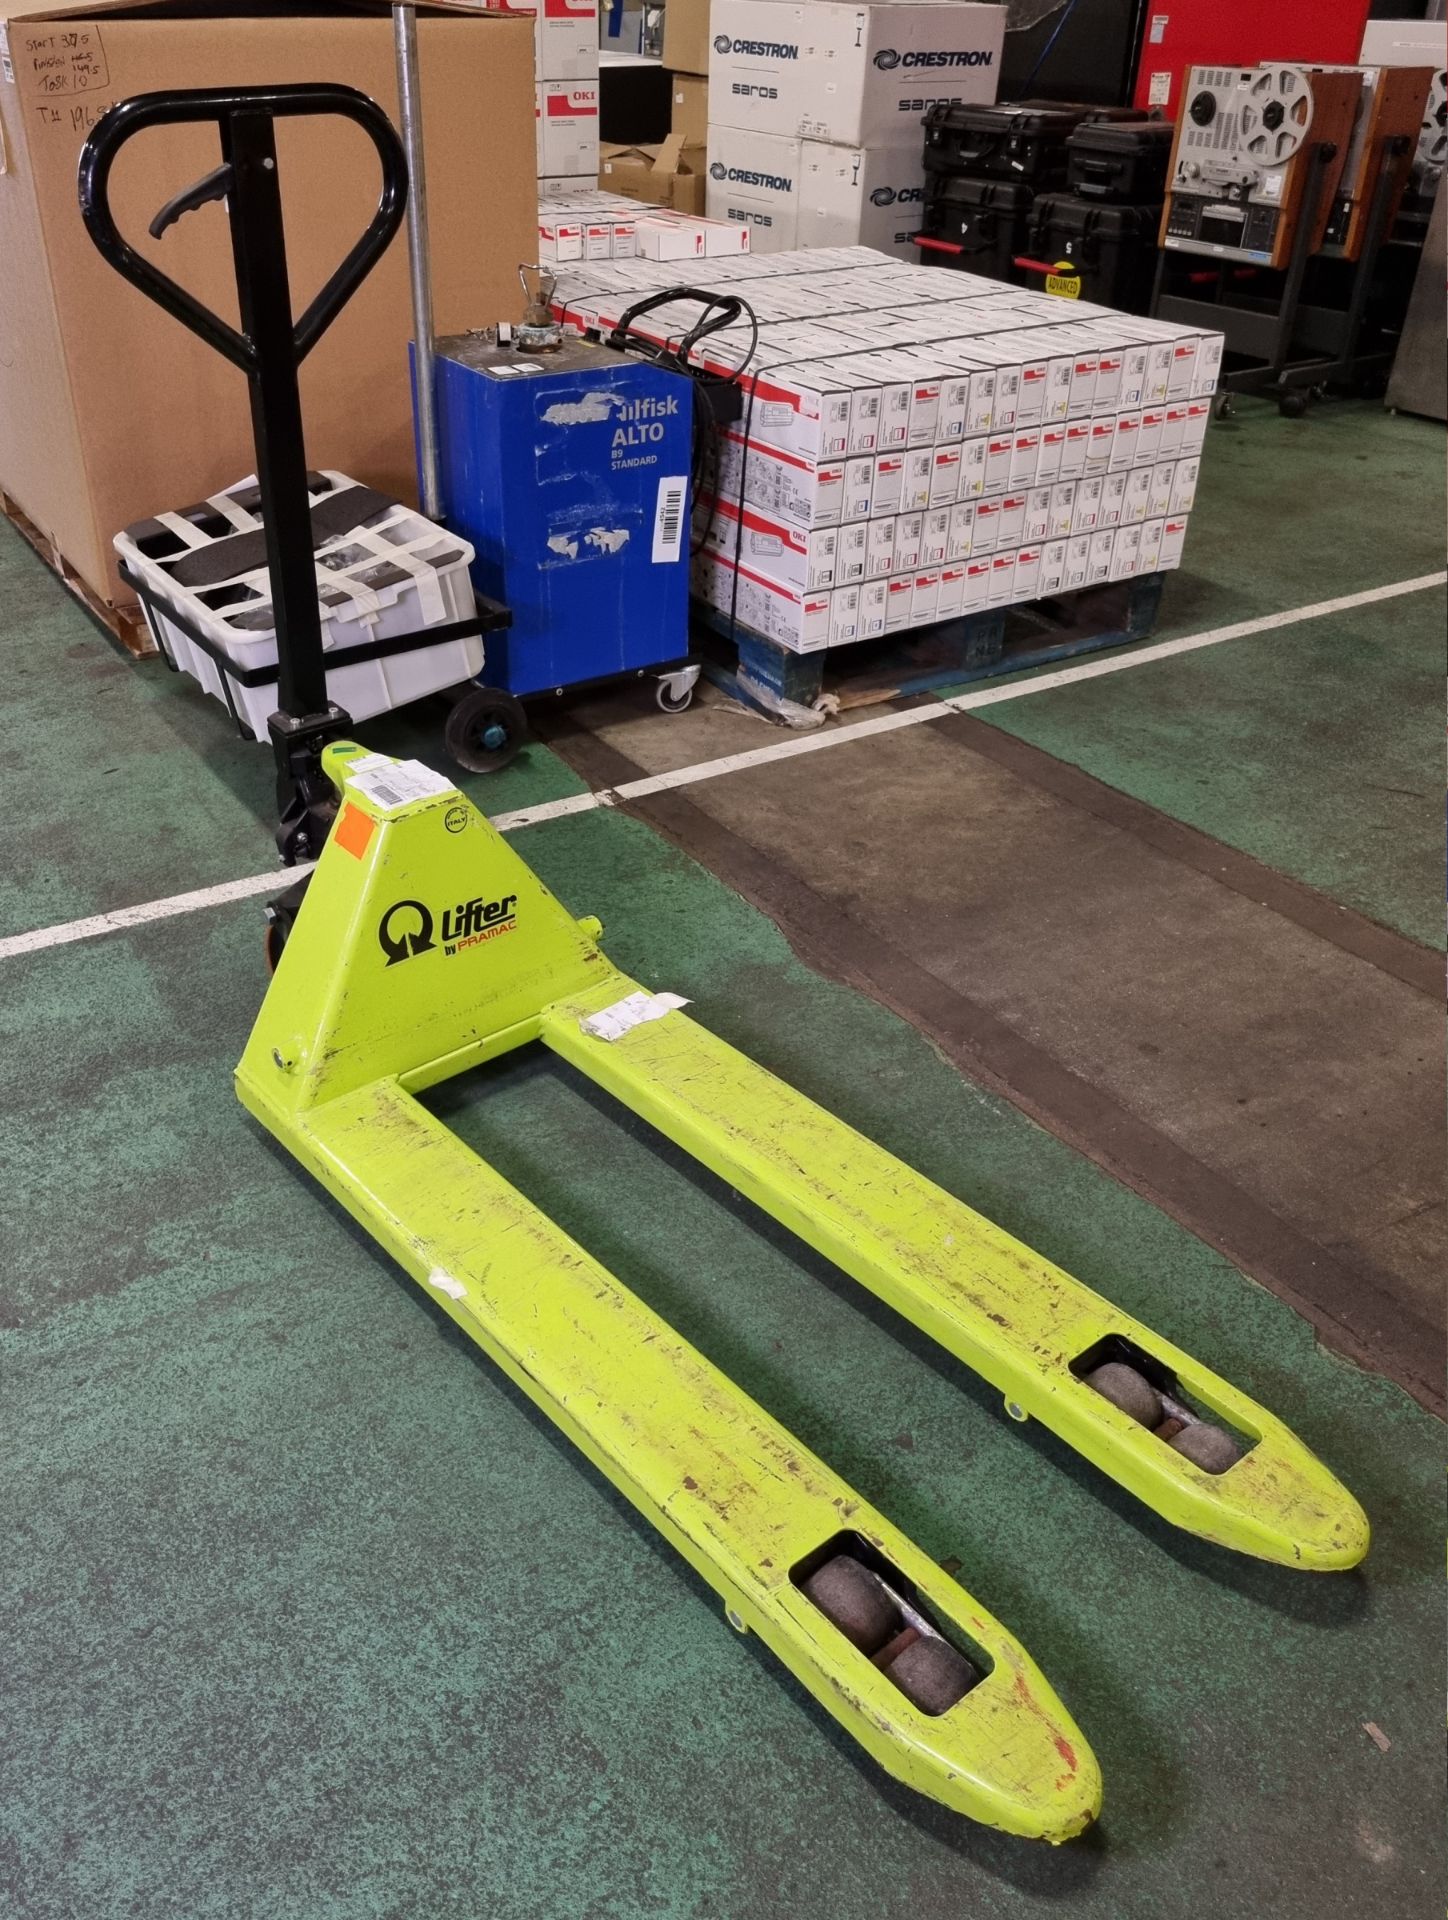 Lifter GS/BASIC 22S4 hand pallet truck - capacity: 2200kg - Image 2 of 4